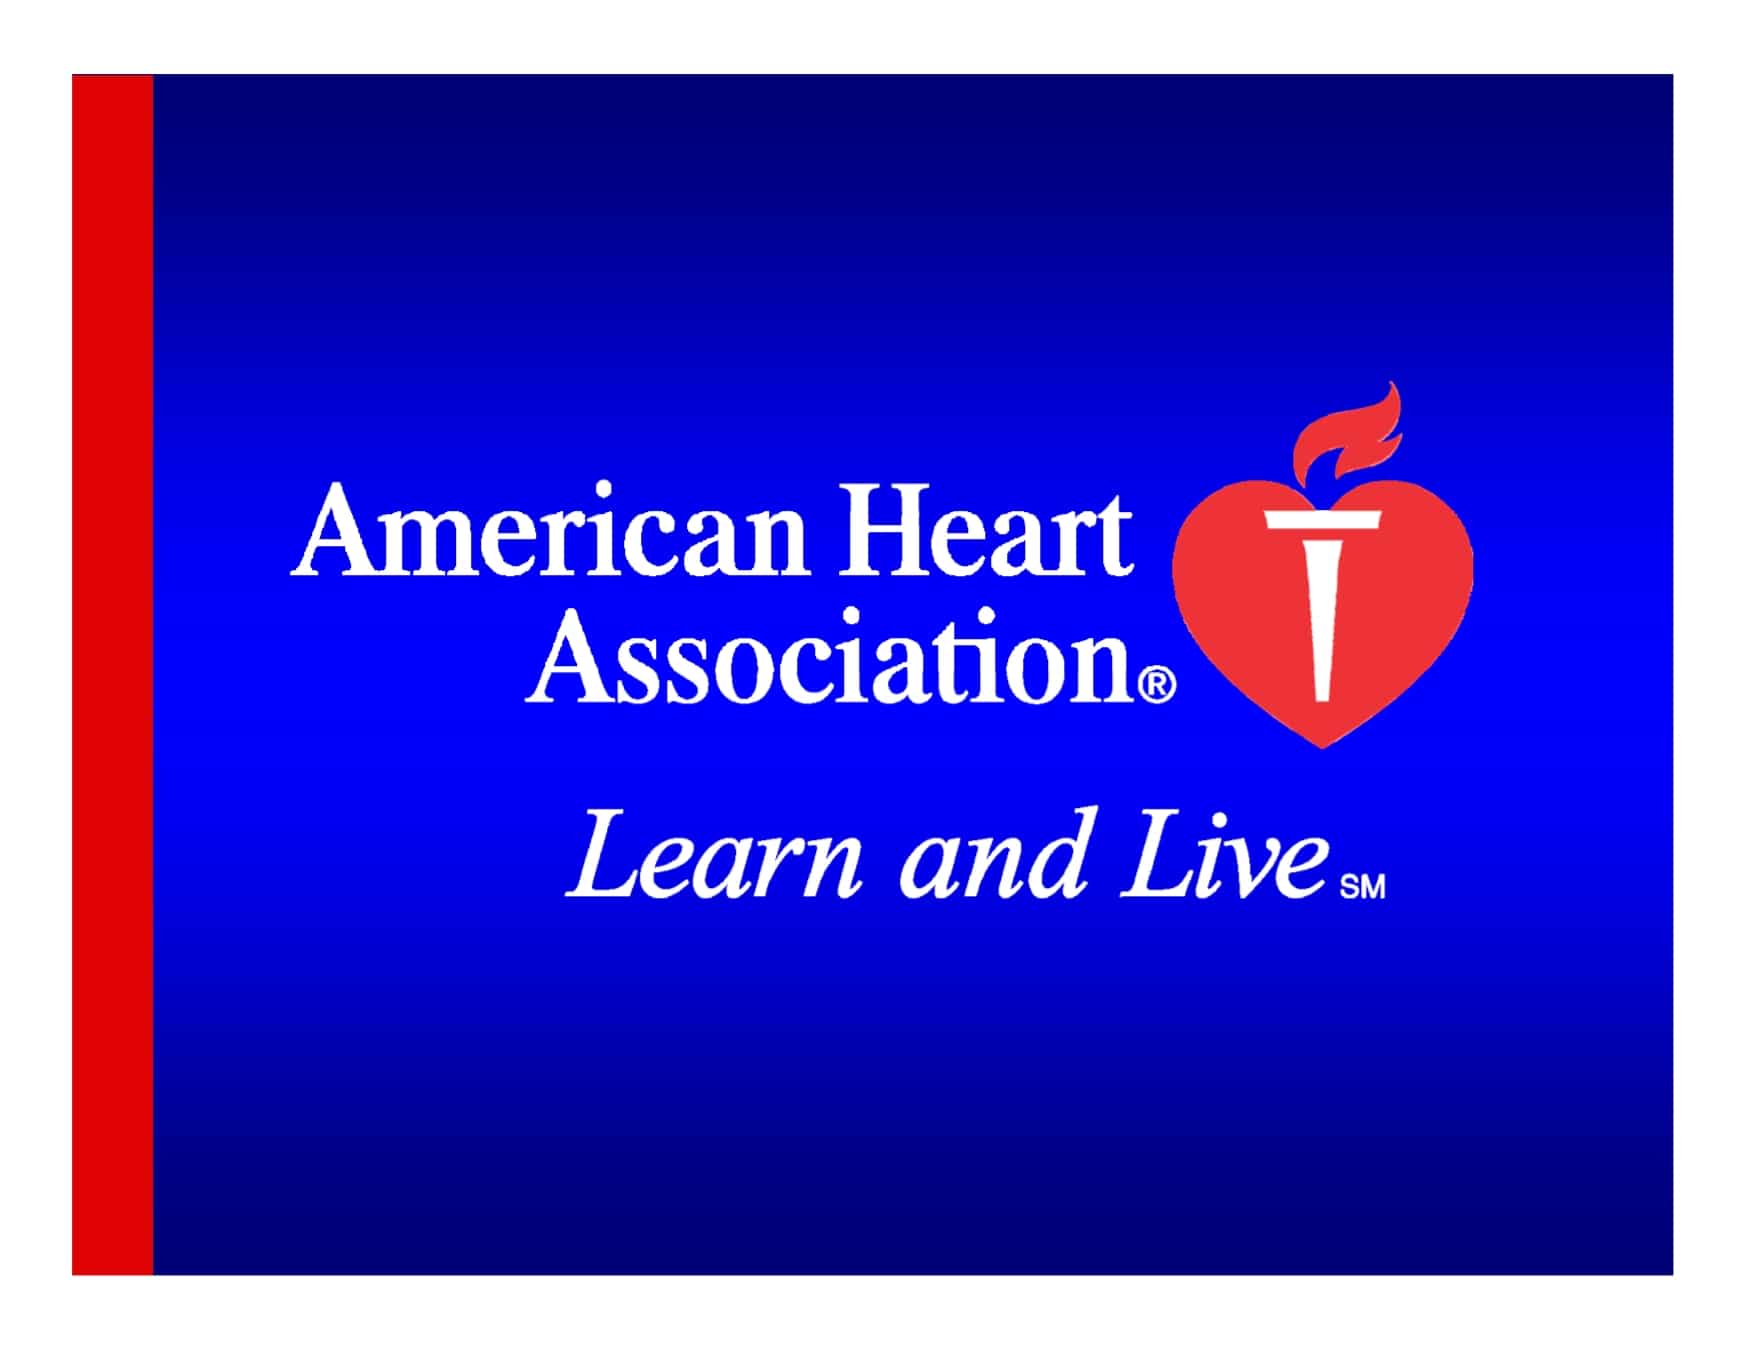 American Heart Association cover.